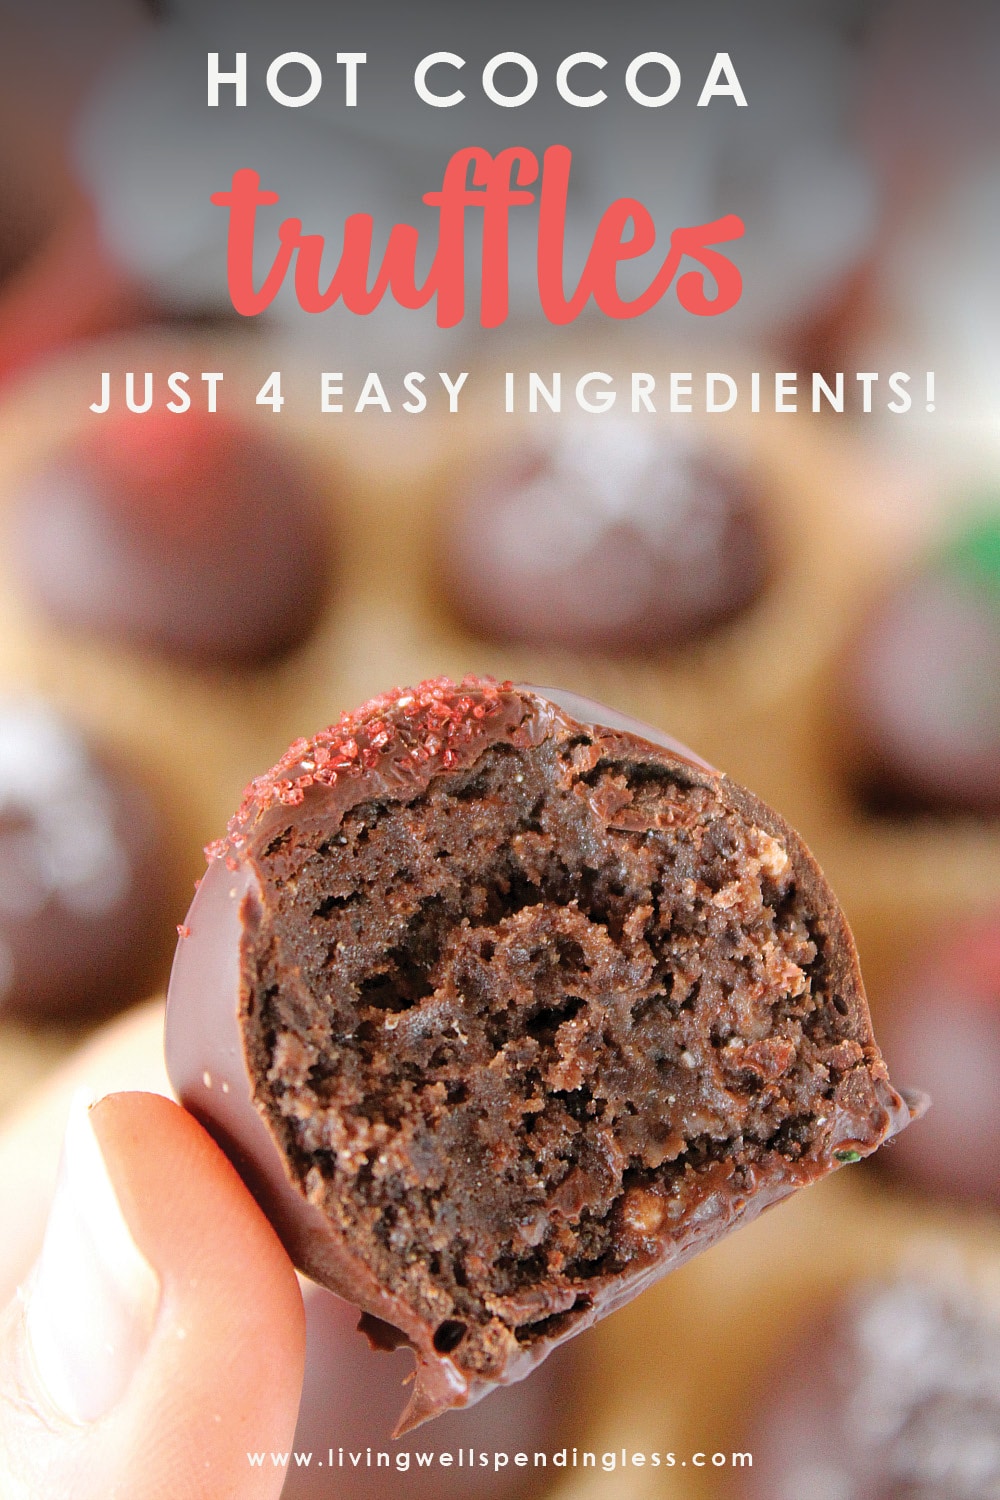 Craving a sweet treat for the holidays? These ridiculously easy Hot Cocoa Truffles come together in minutes with just 4 easy ingredients! Perfect for gifts or just because--and believe us, once you try them, you'll be hooked! #recipes #dessertrecipes #holidayrecipes #chocolaterecipes #trufflerecipes #simplerecipes #5ingredientsorless #giftideas #homemadegifts #holidays